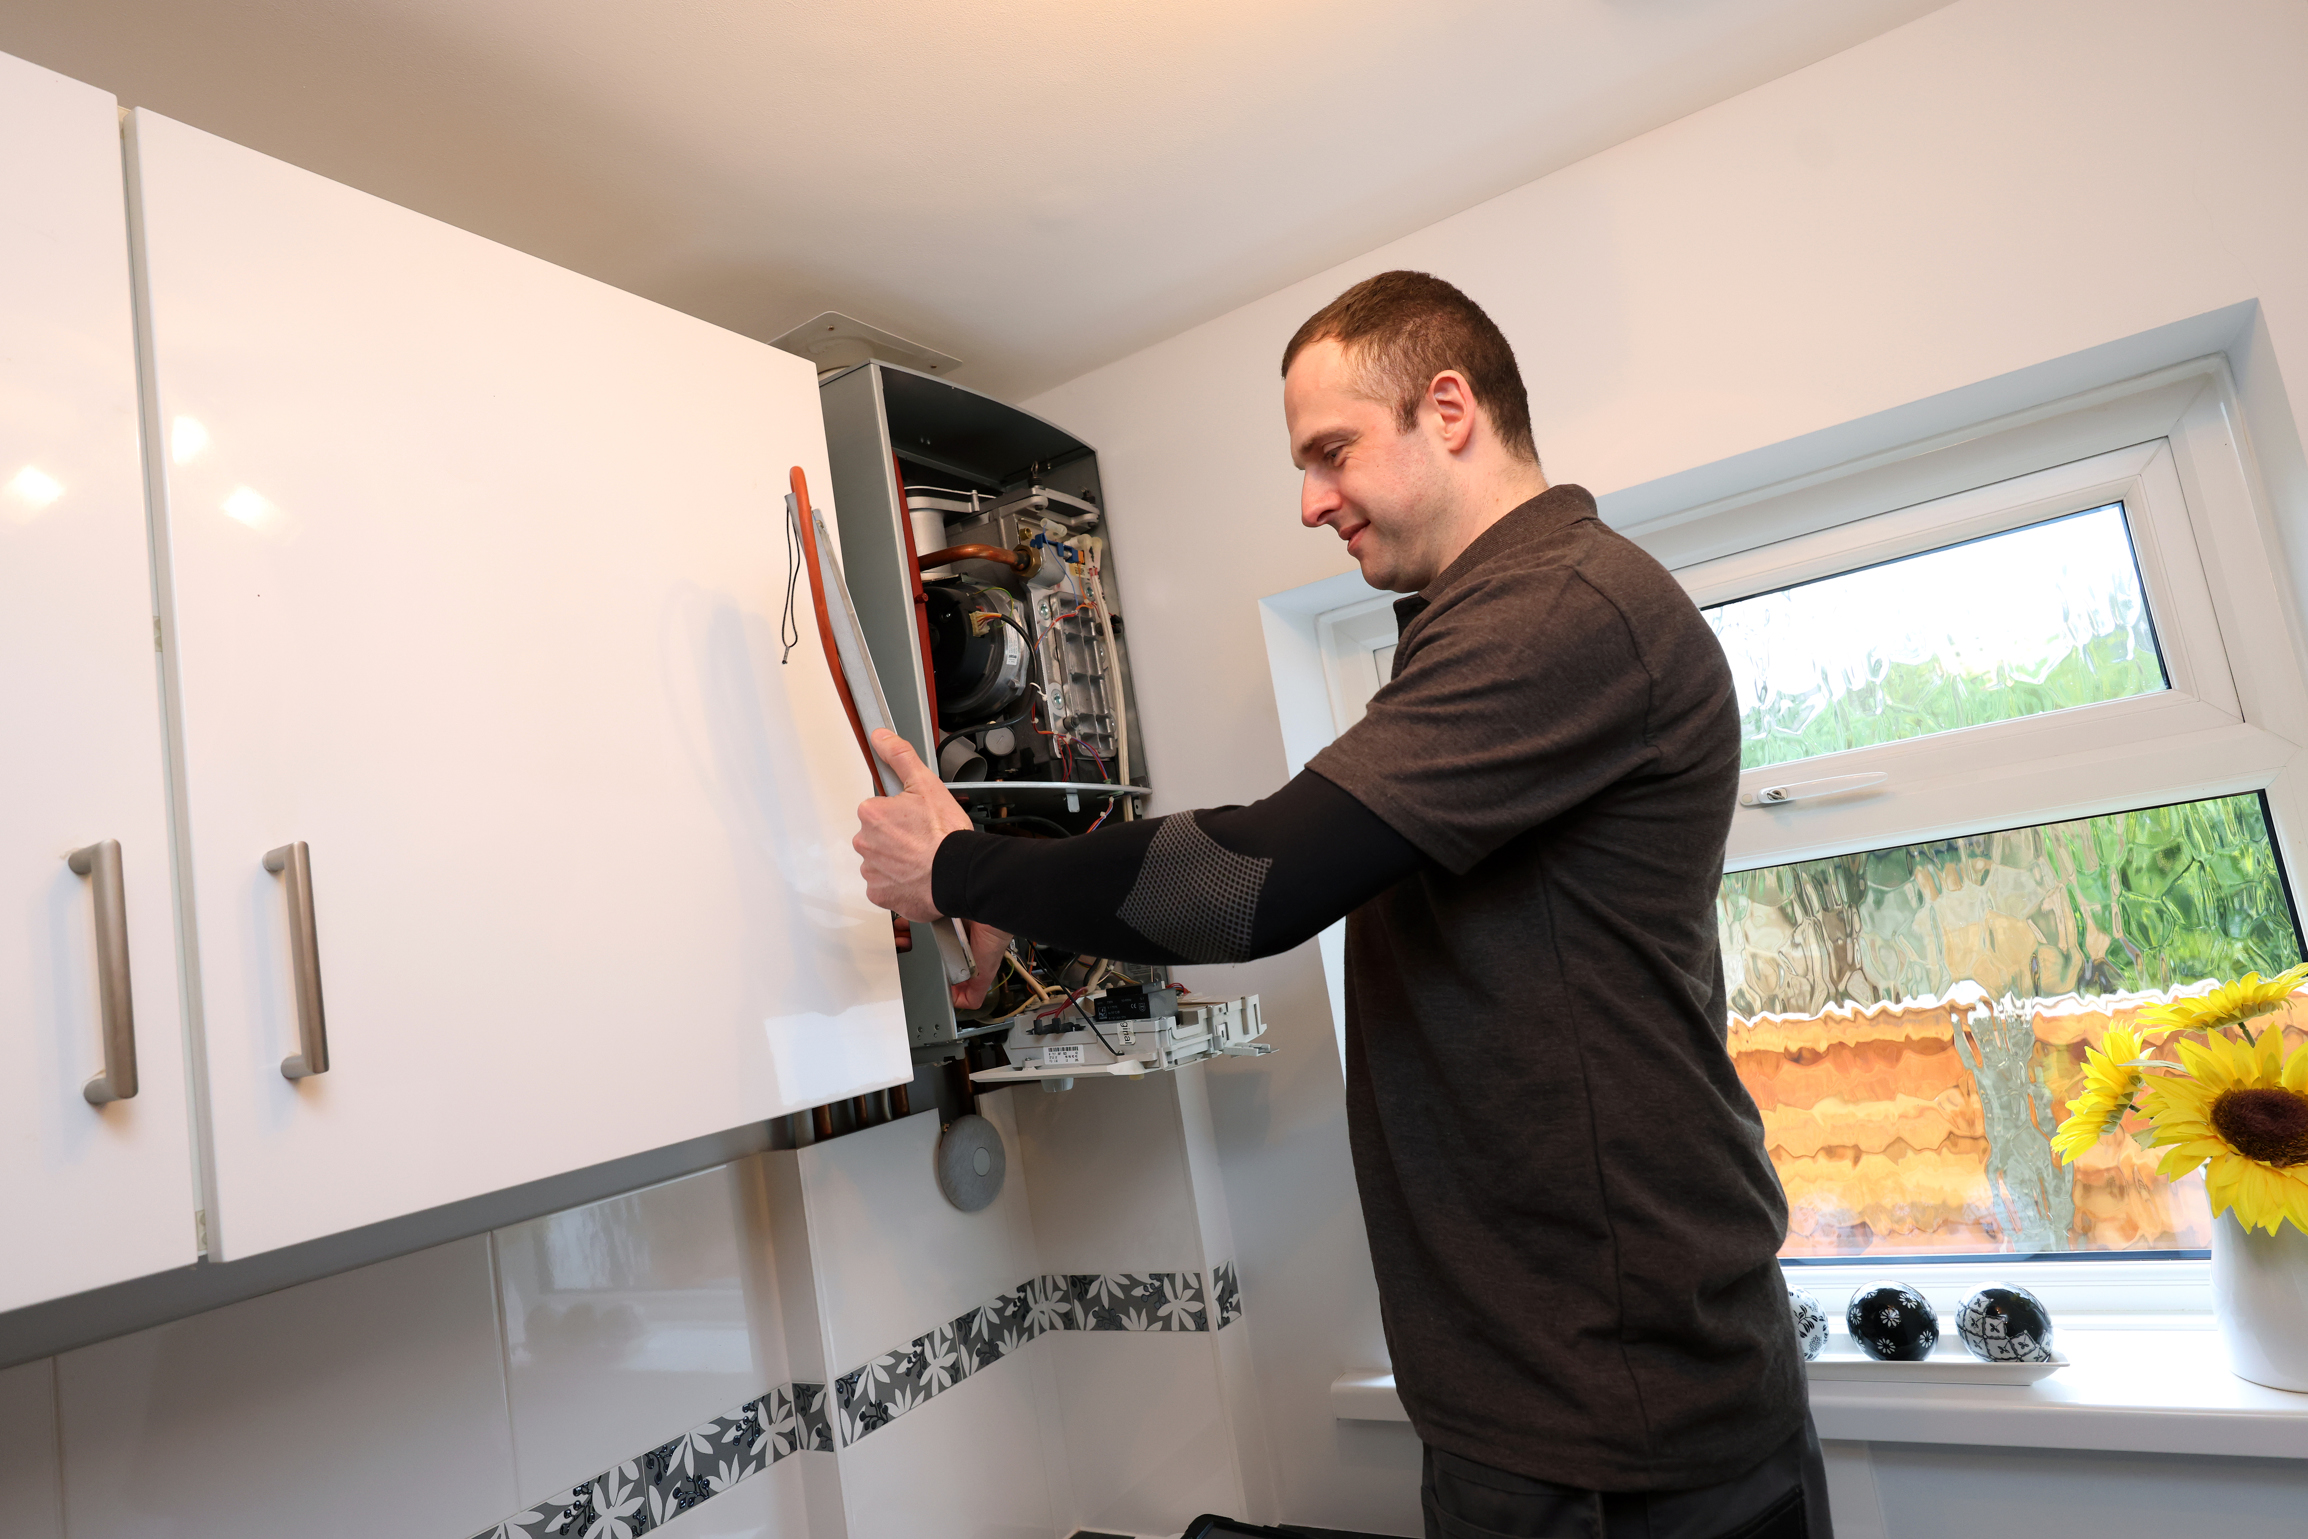 Help! My Boiler is Leaking Water – What Should I Do?